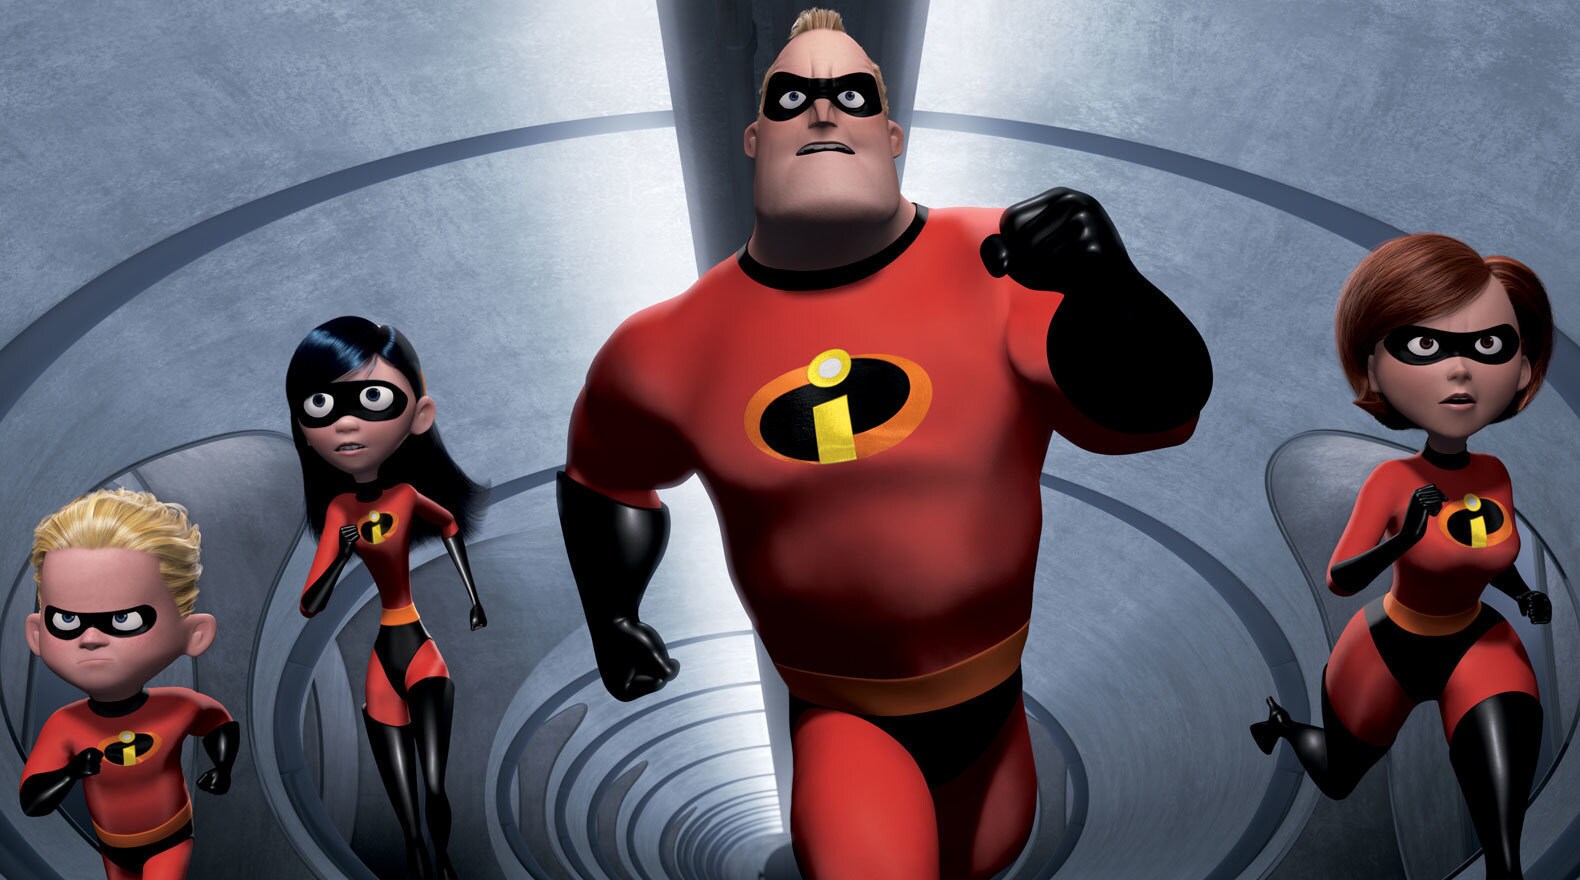 The Incredibles are on their way to confront Syndrome and the Omnidroid.